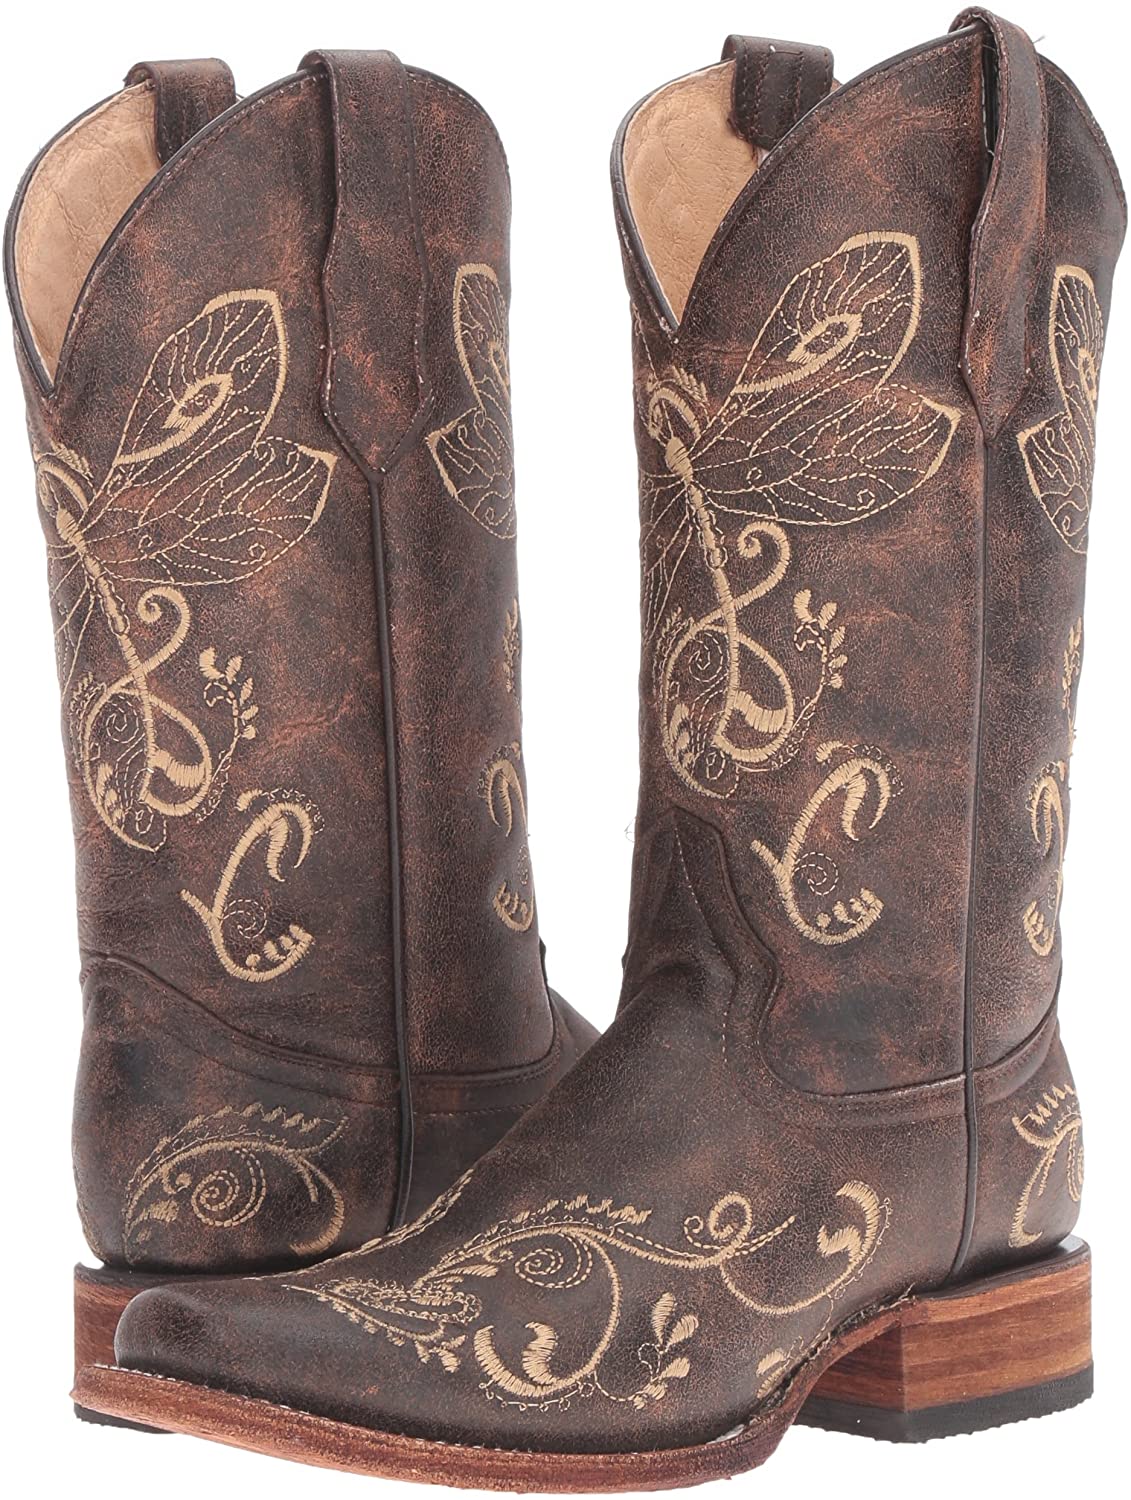 L5079 - Circle G brown roper western leather boots for women-BOOTS-kuet